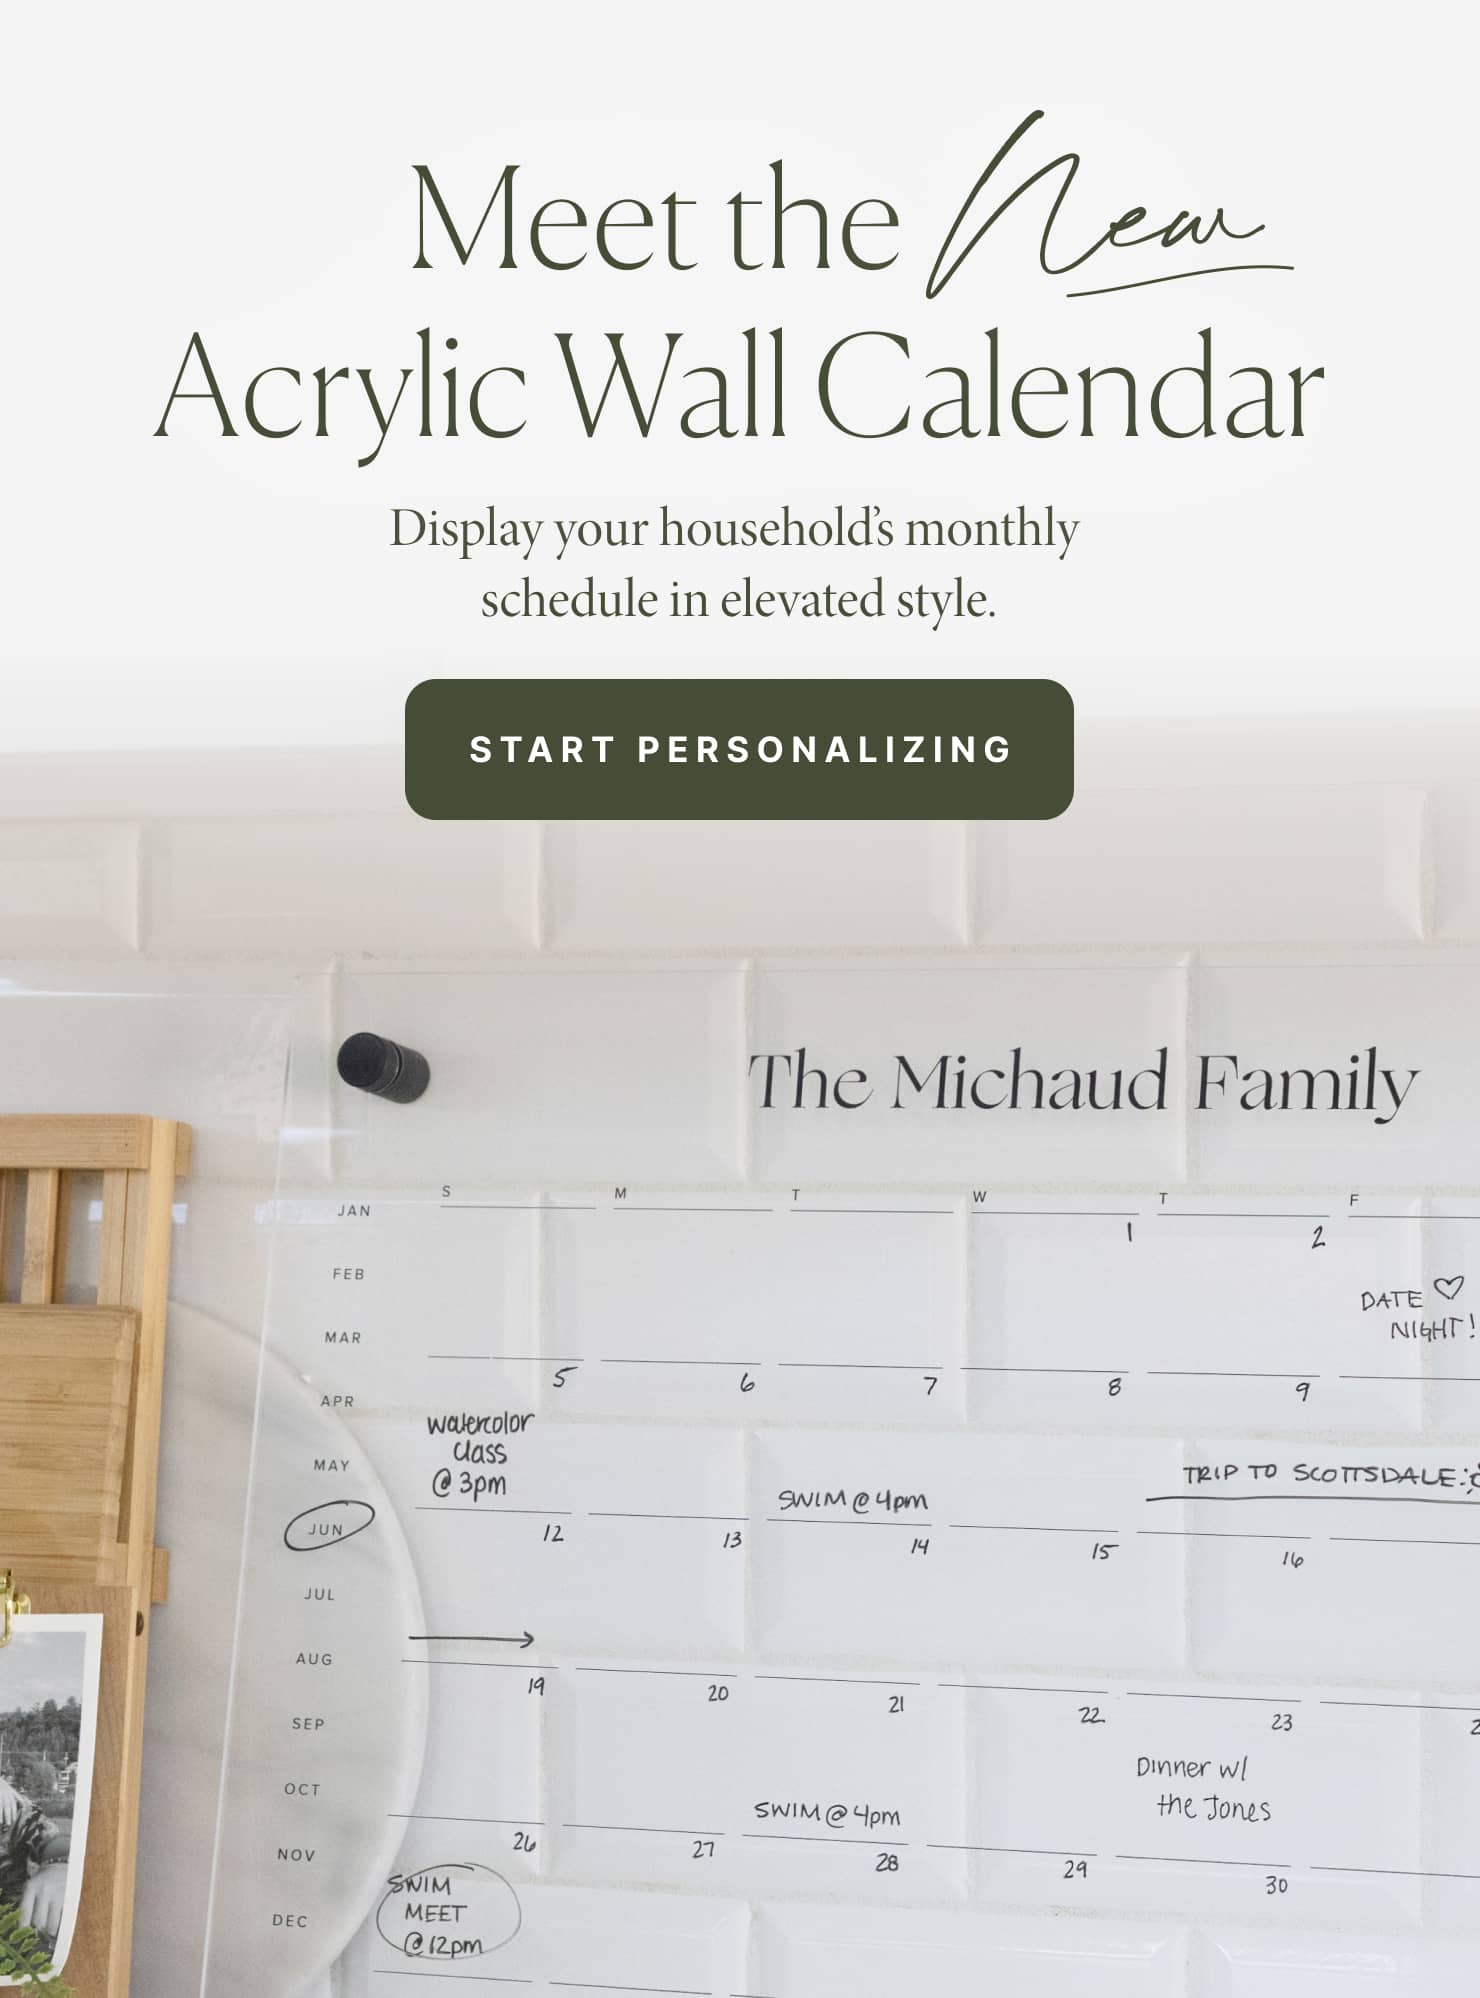 Meet the fleae Acrylic Wall Calendar Display your households monthly schedule in elevated style. START PERSONALIZING W The Michaud Family ! Z pate NIigHT ! 55 b 7 8 9 wamoor @ 3: TRIP T SCOTTSDALE P SWIM @ Ypm 12 13 1 e T 9 20 2 2 23 2 Dner w SWIM @ Ypm e Jongs oct Nov 28 N 2 30 DEC Meer 4 Zpm I 